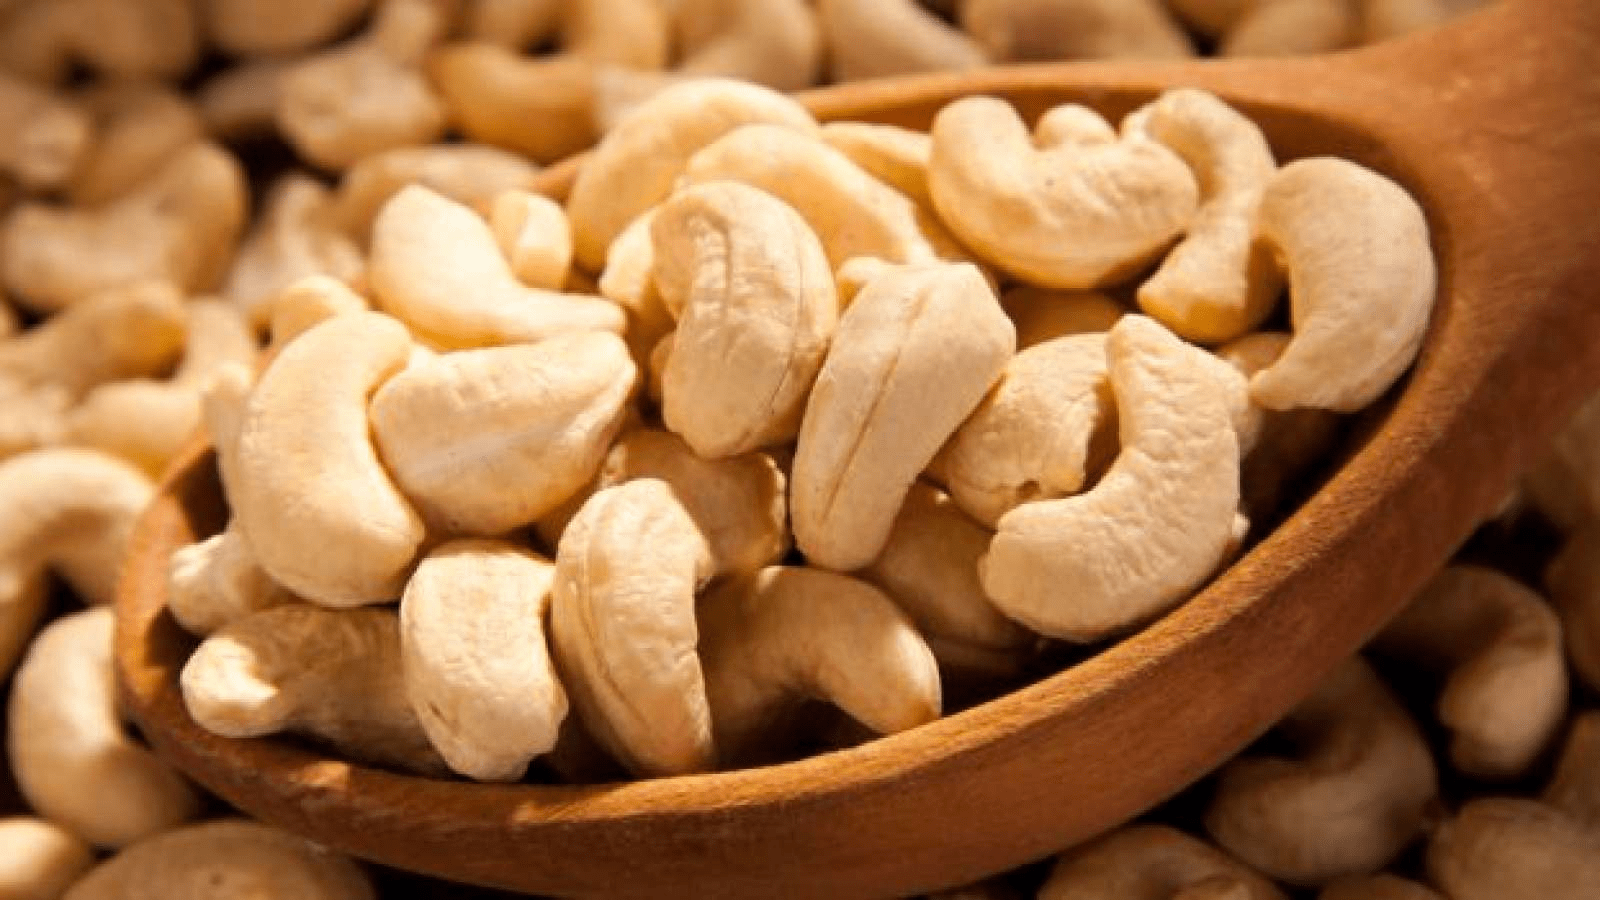 manufacturer of cashew nuts